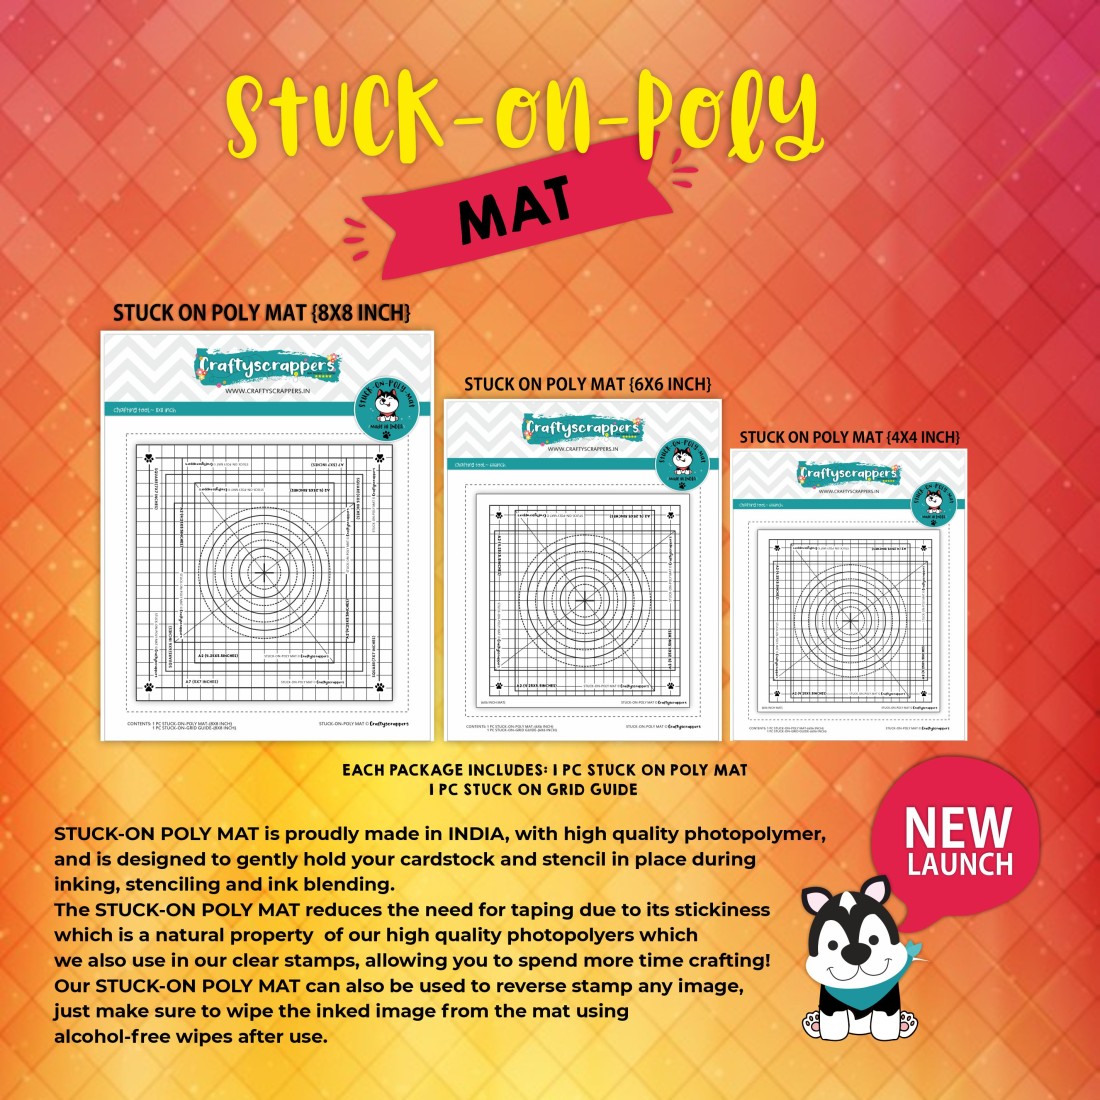 Craftyscrappers - STUCK-ON-POLY MAT